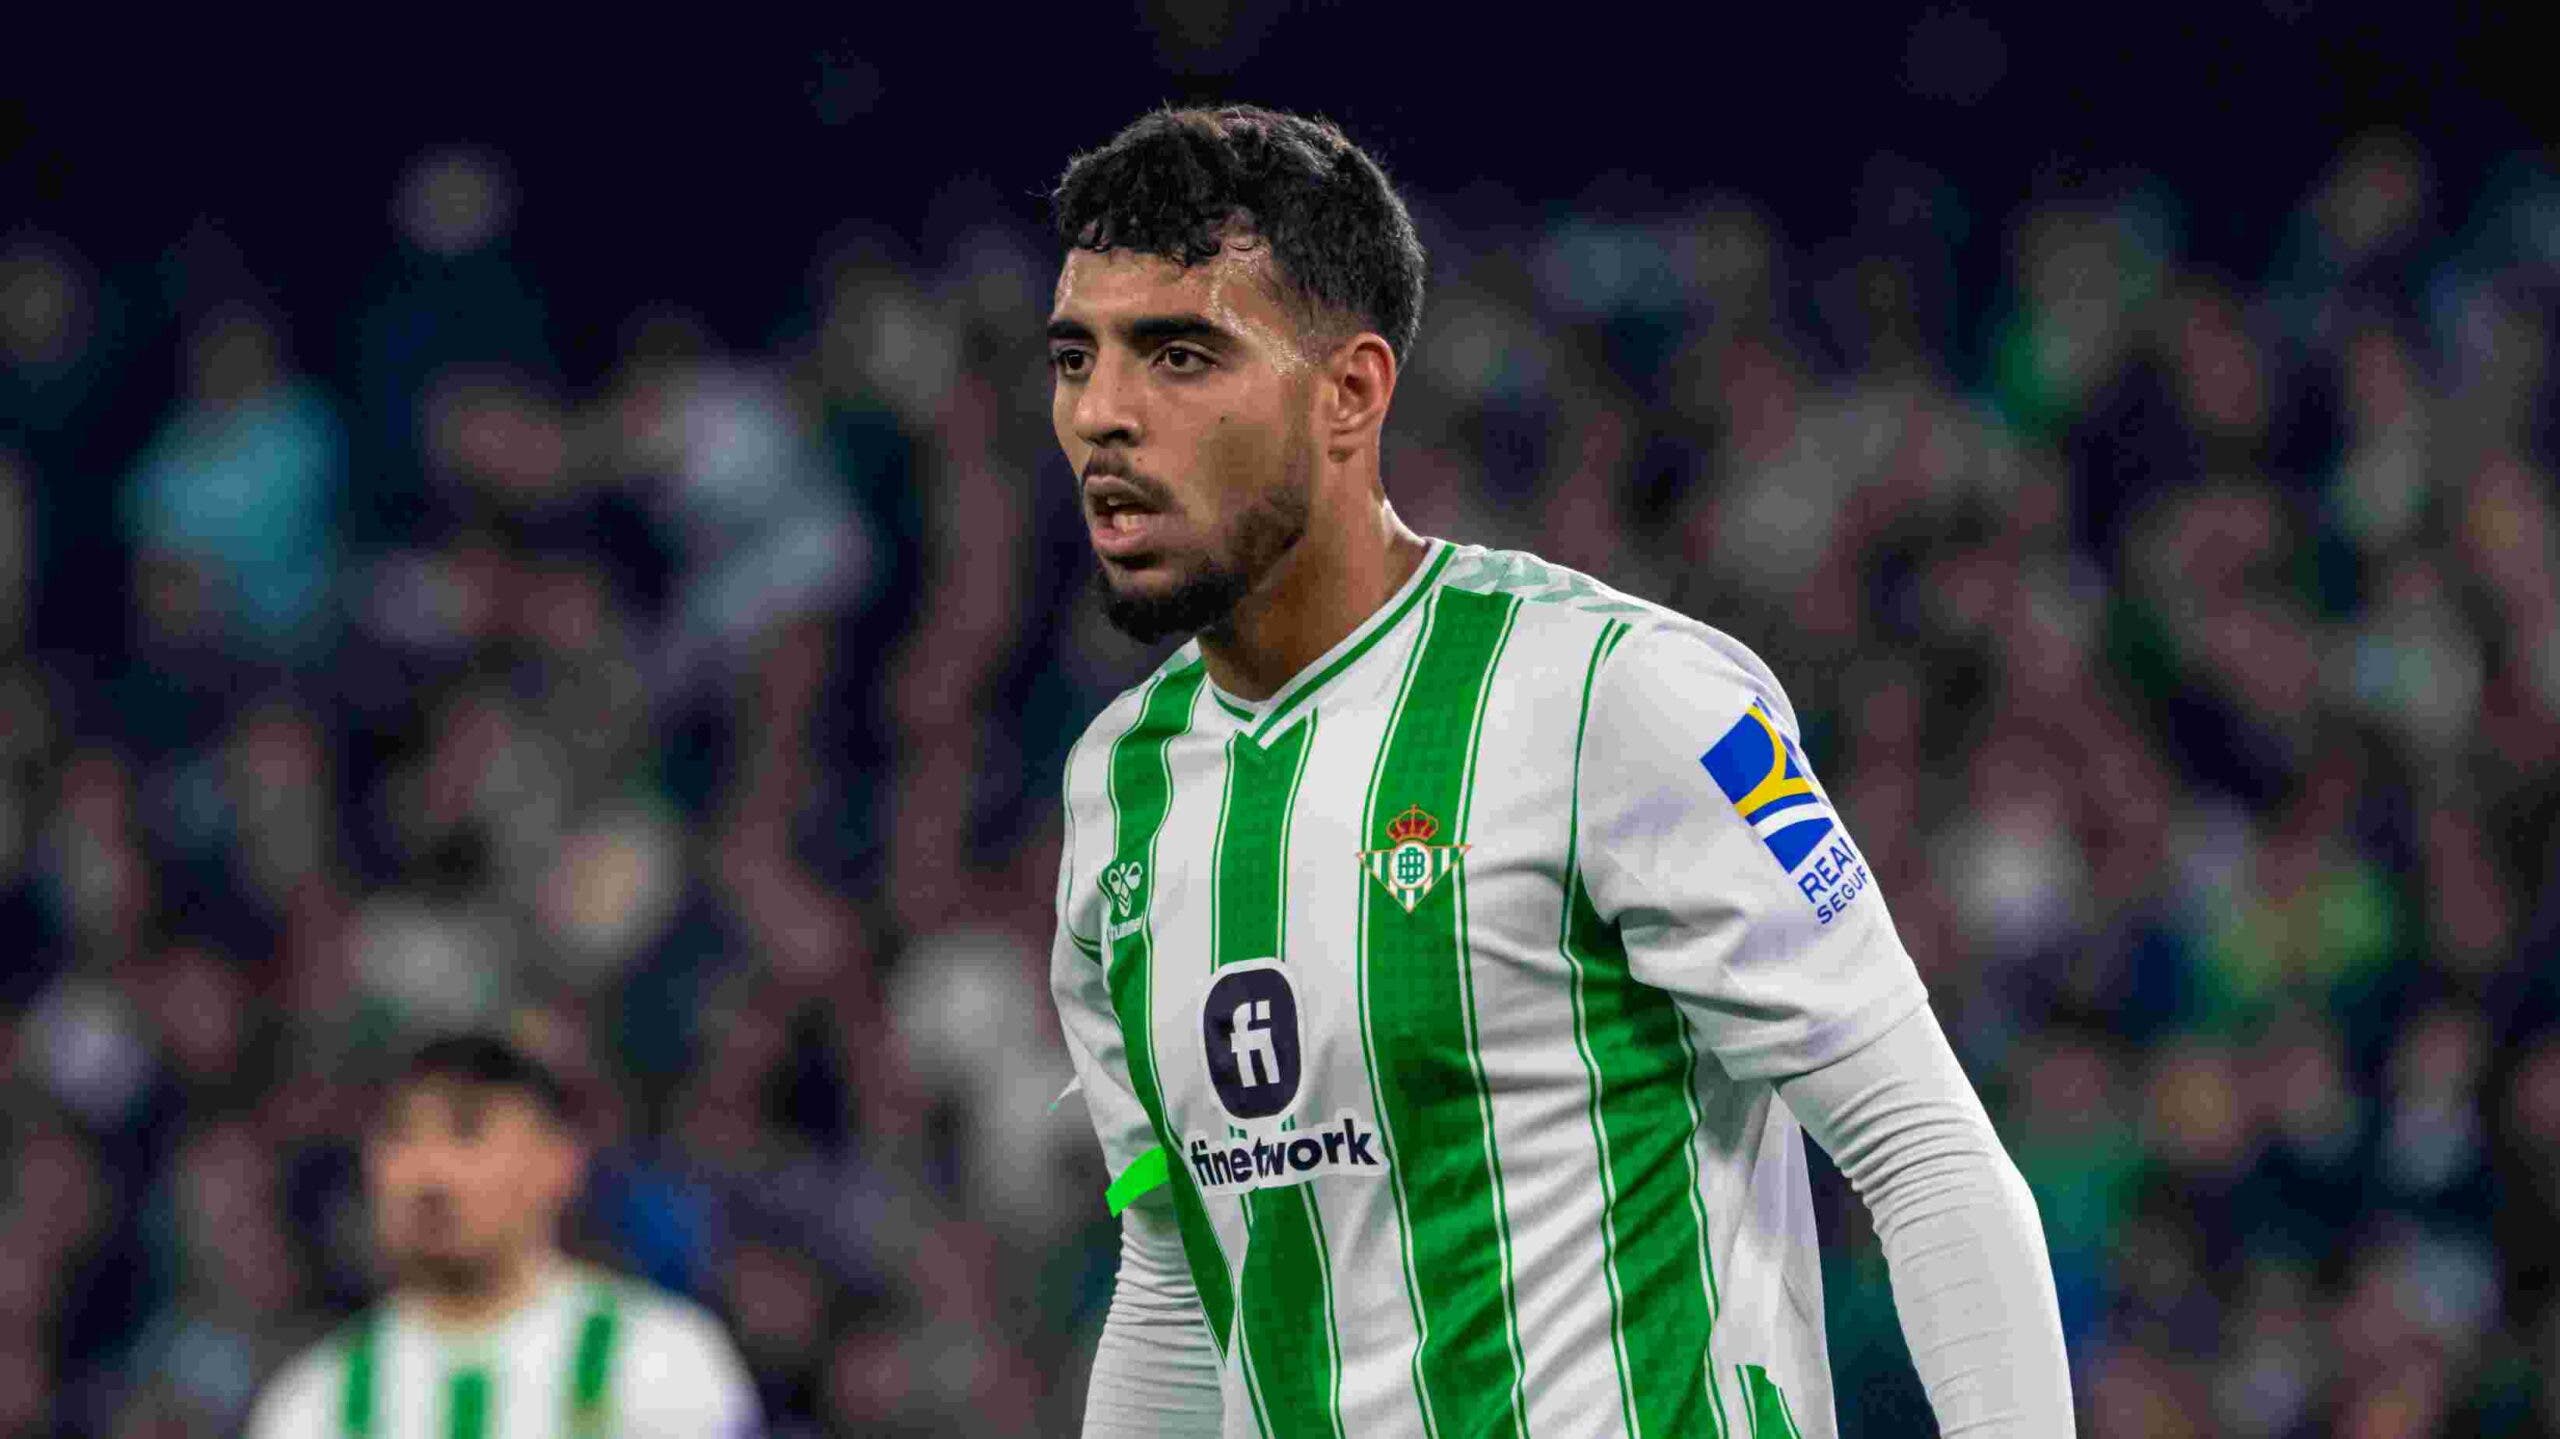 Betis knows Barça's decision with Chadi Riad
	

